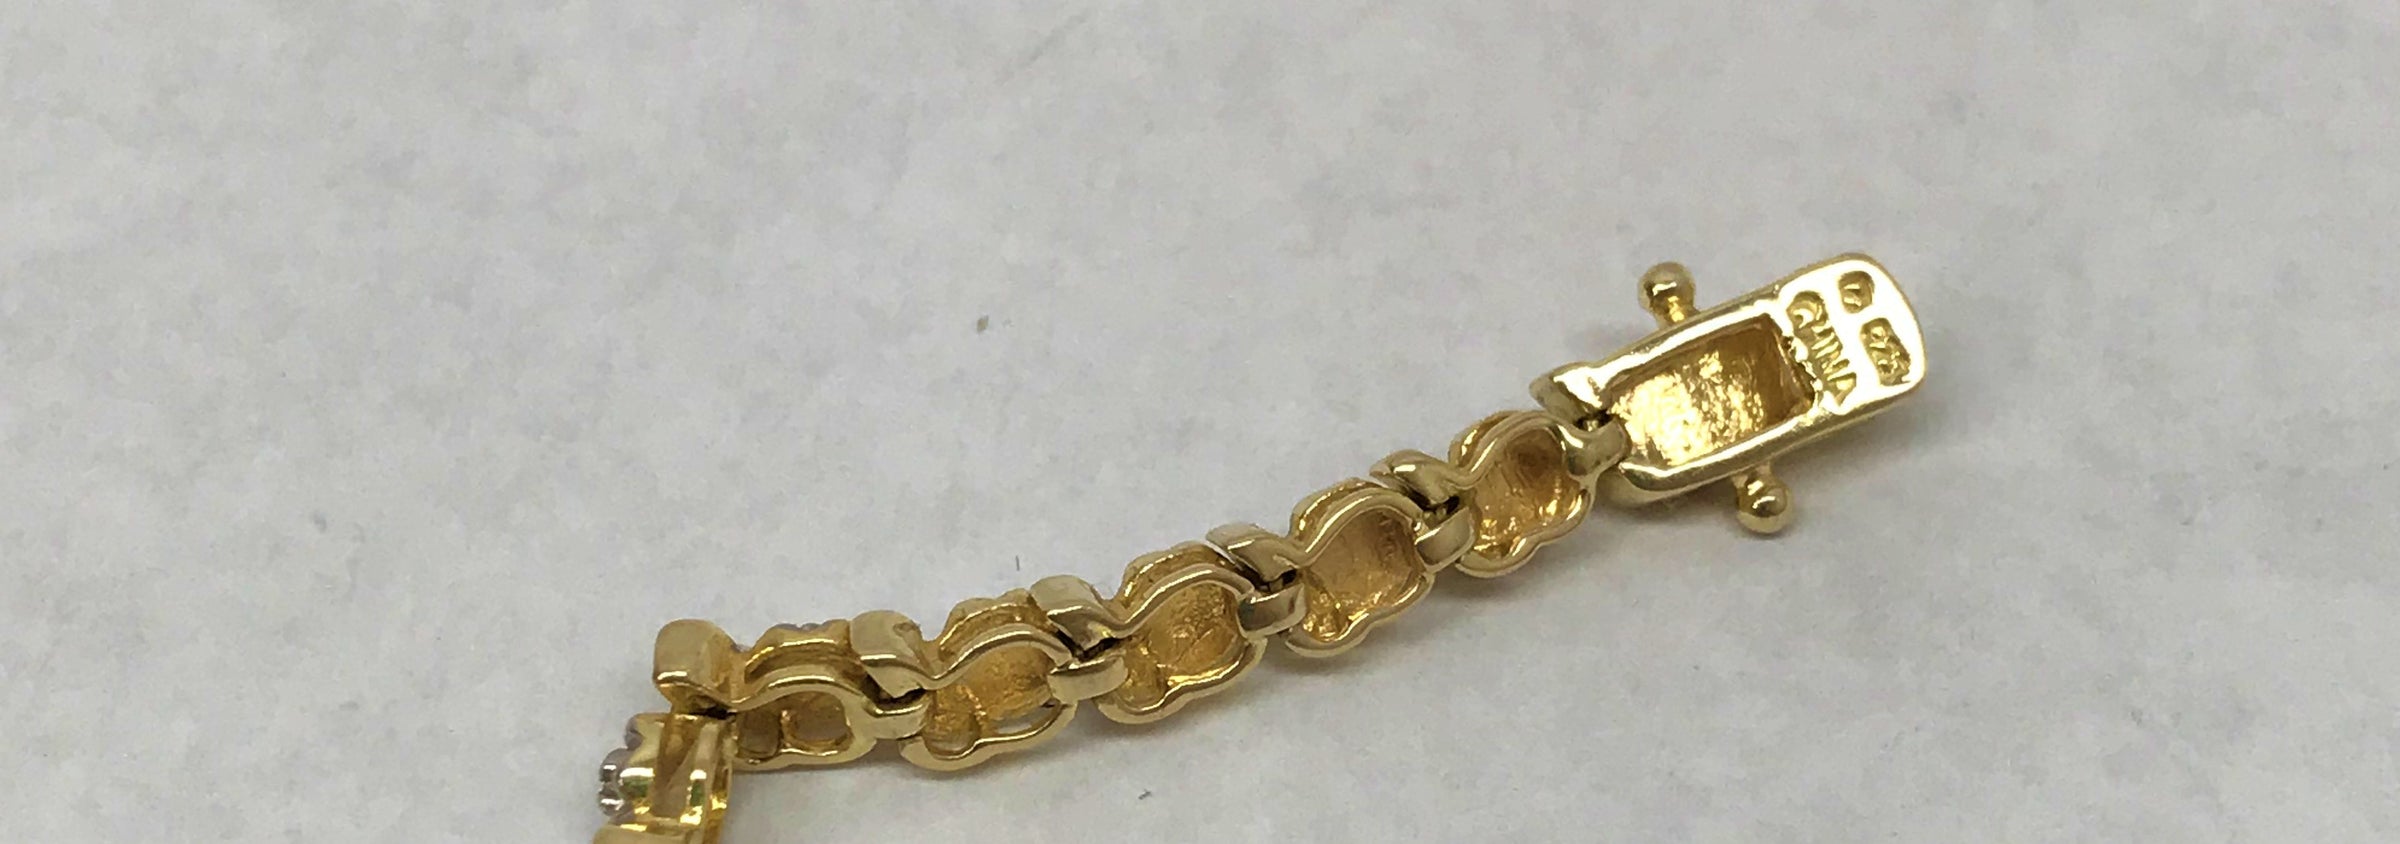 Gold Over Sterling Silver Simulated Diamond-Cut Tennis Bracelet